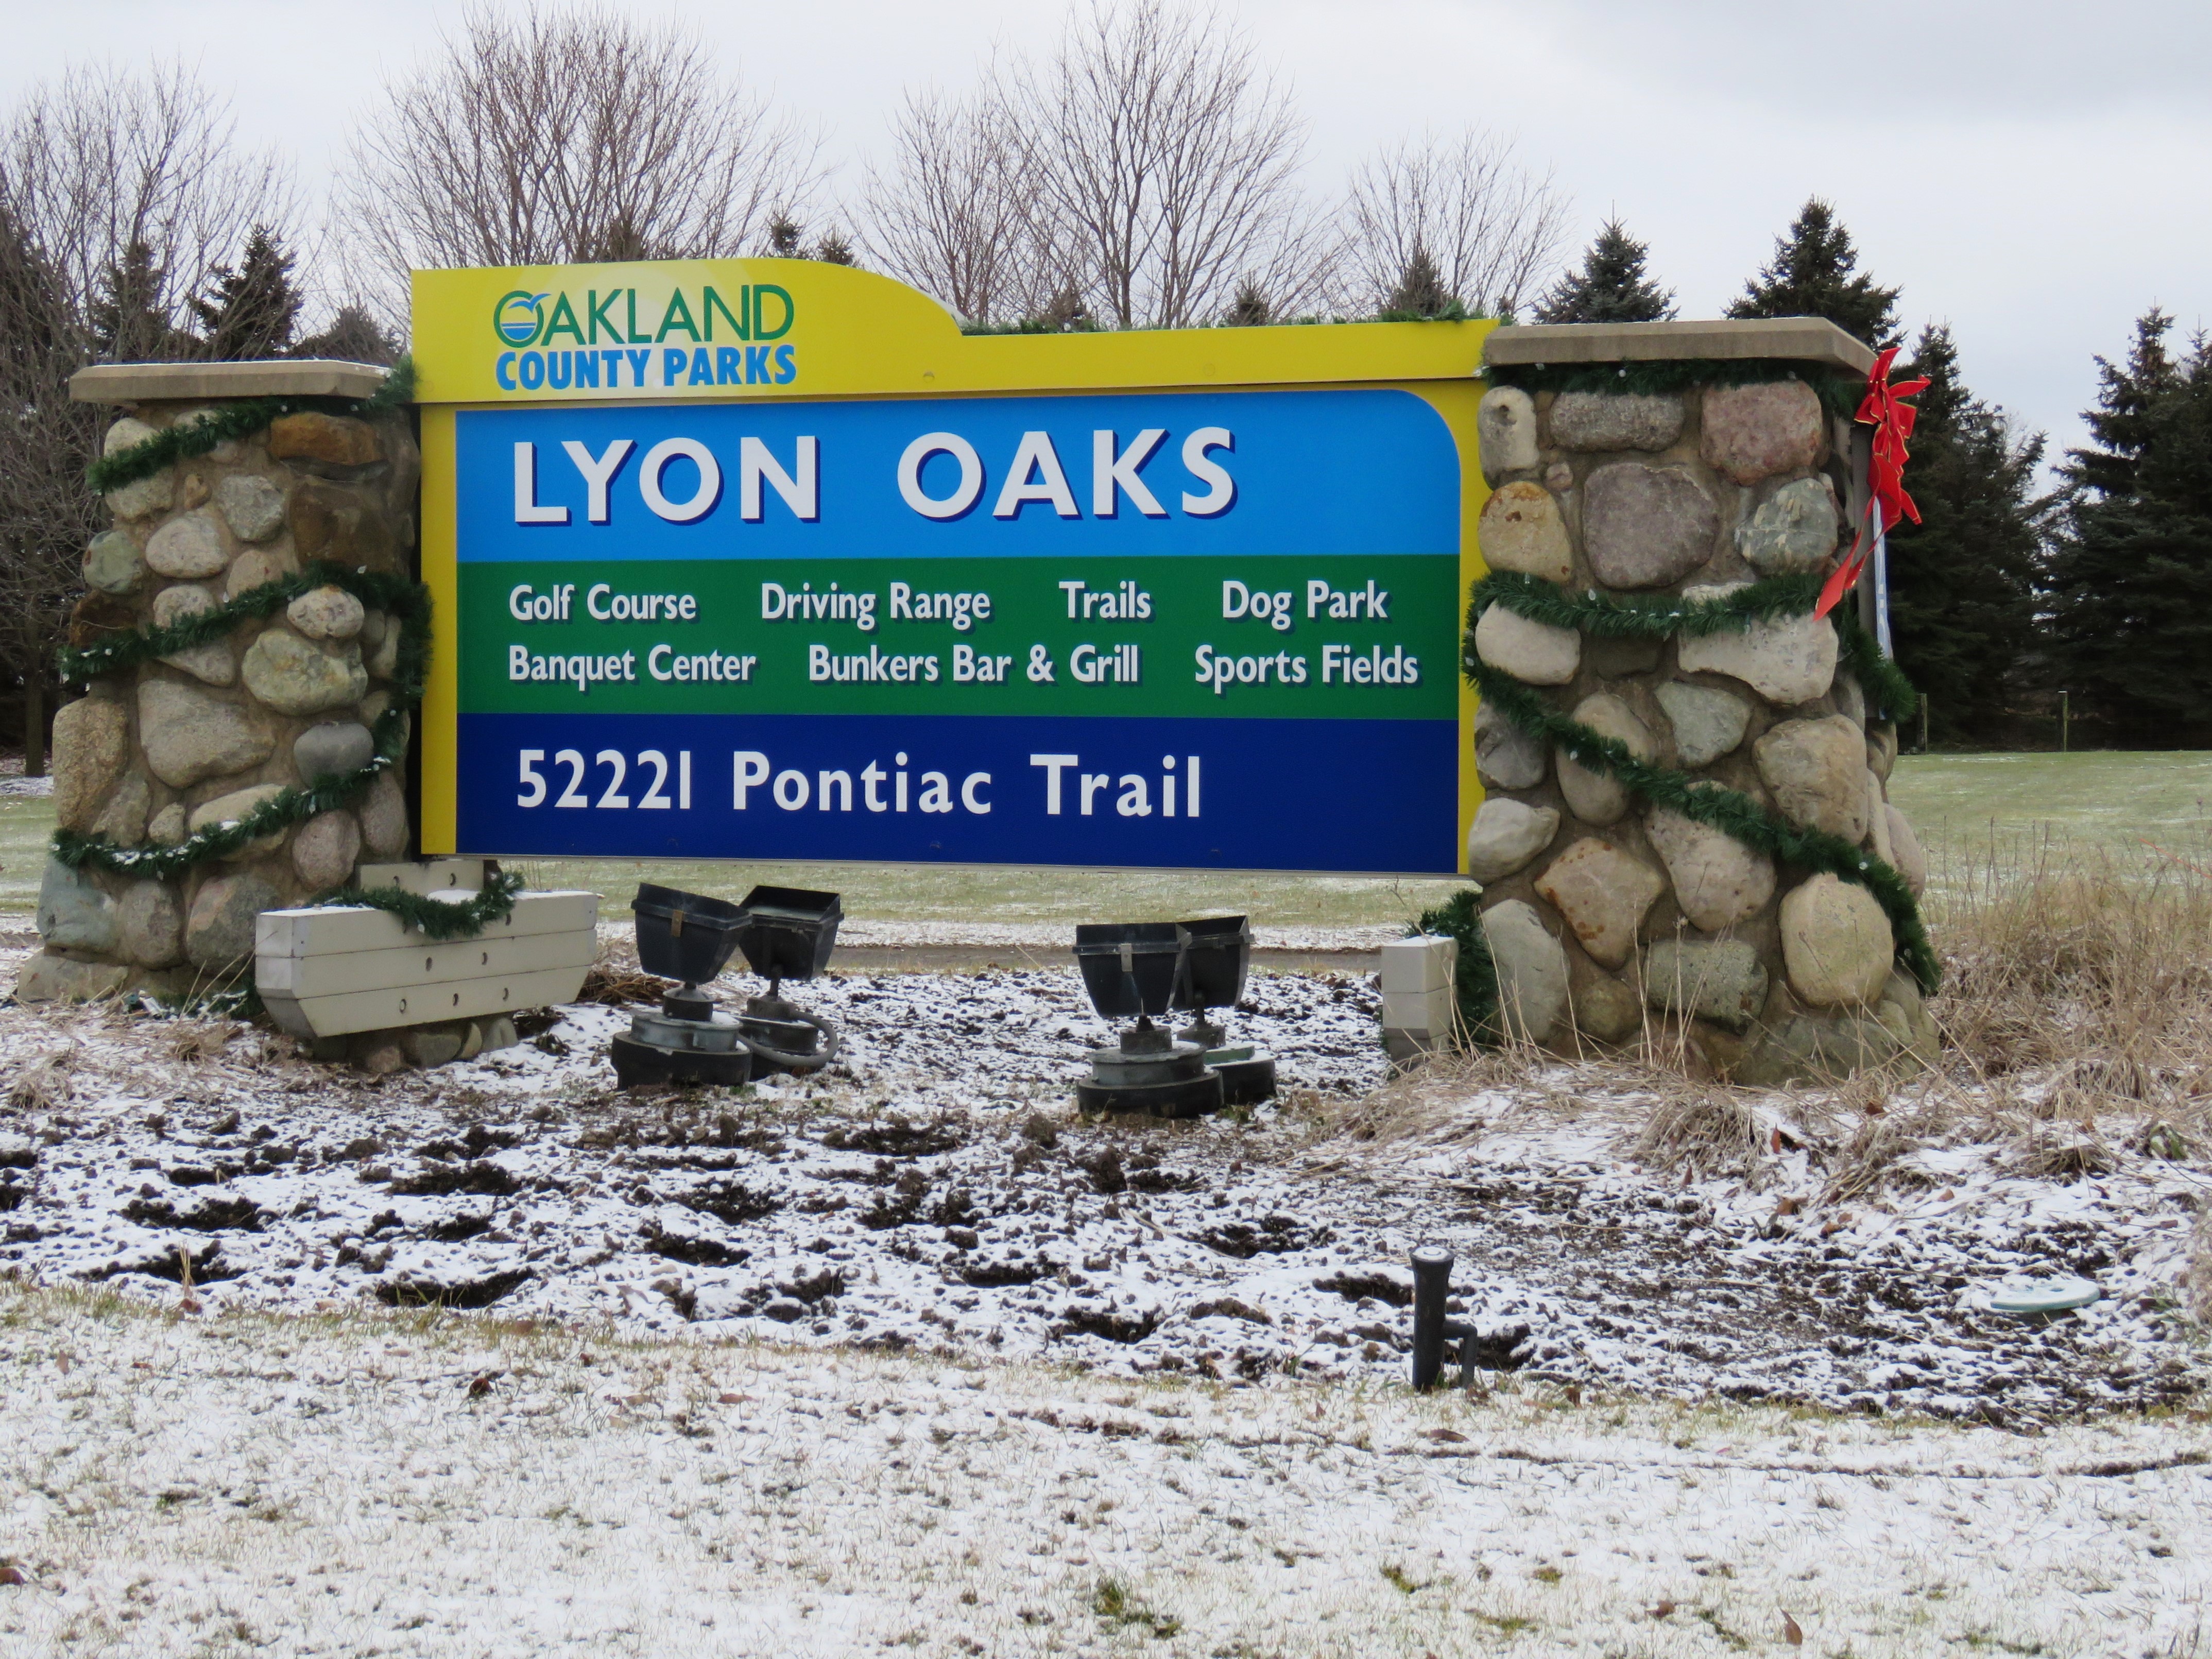 A large sign reads: Oakland County Parks, Lyon Oaks 52221 Pontiac Trail. Amenities listed on the sign are: Golf Course, Banquet Center, Driving Ranet, Bunkers Bar & Grill, Trails, Dog Park, and Sports Fields